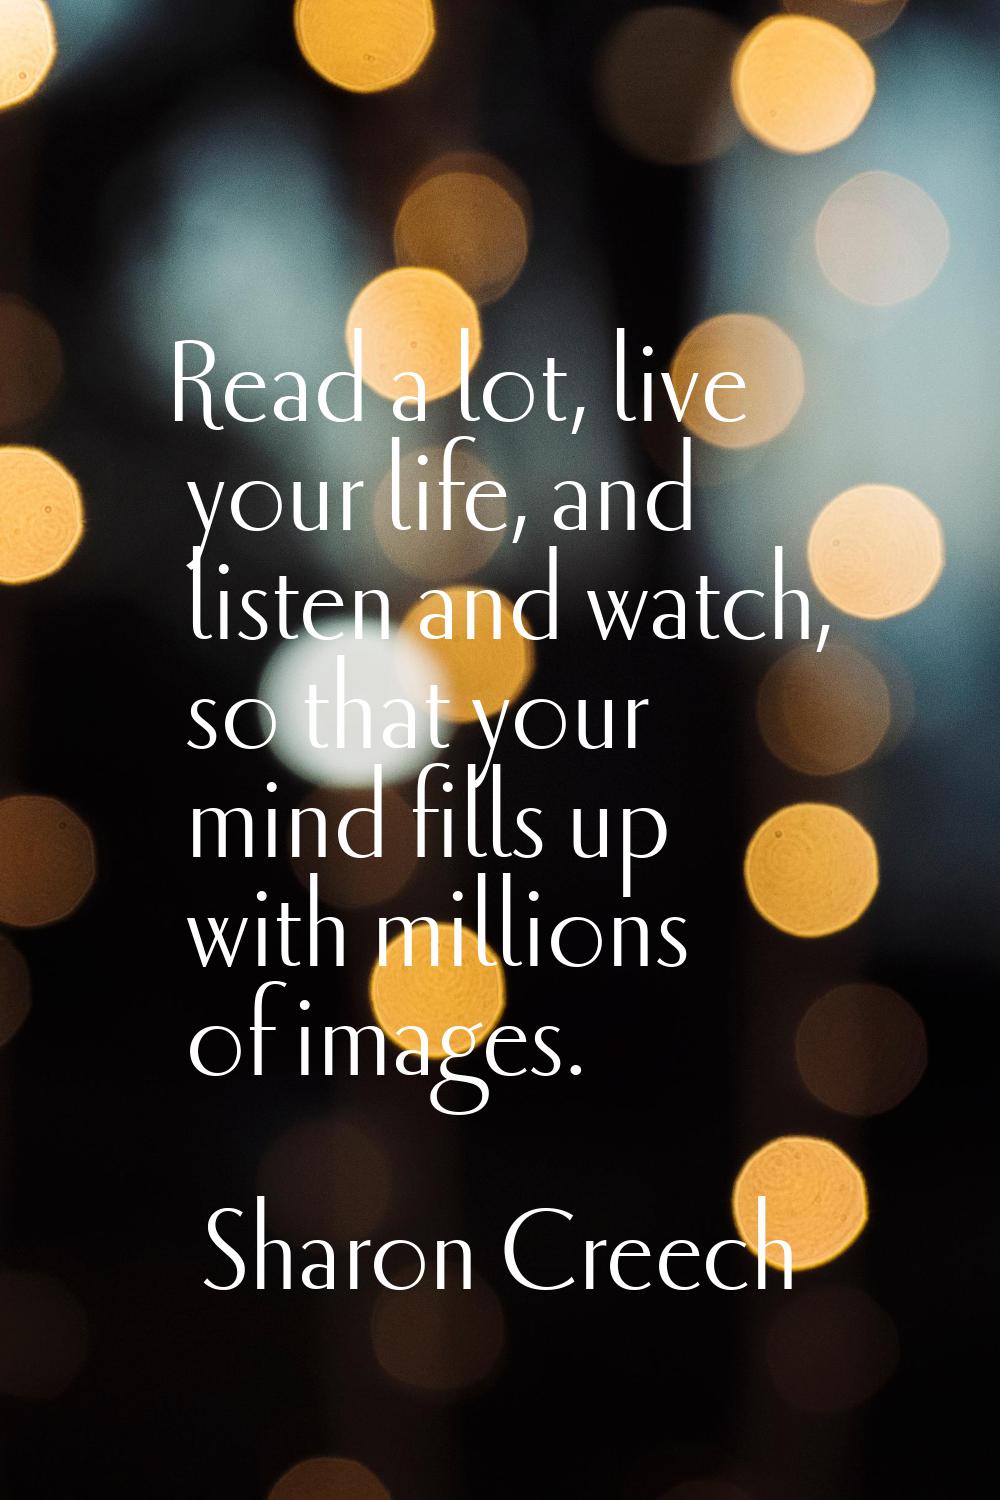 Read a lot, live your life, and listen and watch, so that your mind fills up with millions of image